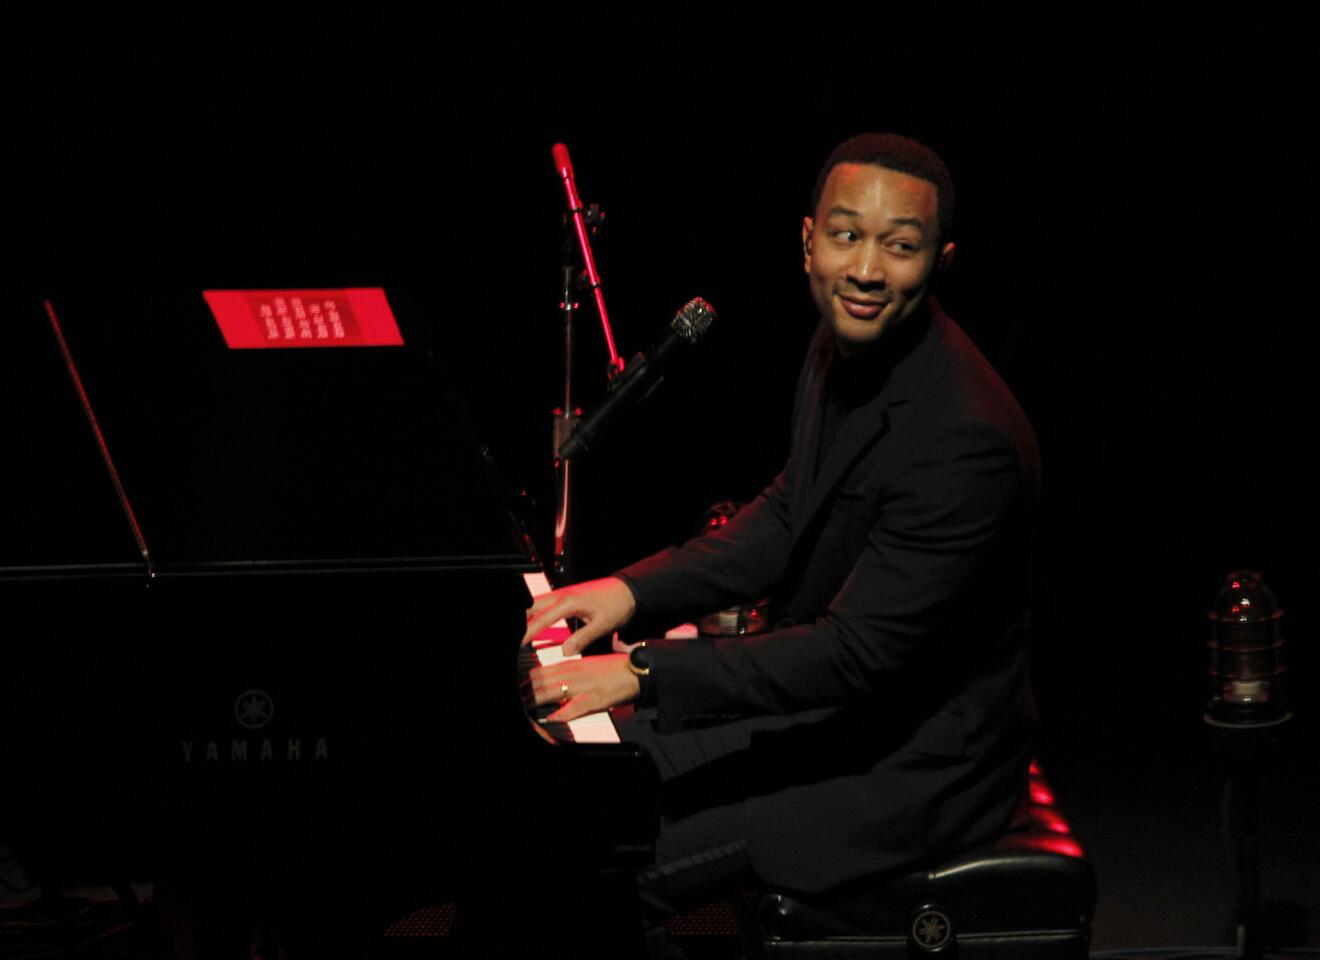 John Legend, the R&B singer whose recent work has trended away from civil rights-era soul to more personal, electronic meditations on relationships, oozes charm during his acoustic performance at Walt Disney Concert Hall in Los Angeles on March 26, 2014.